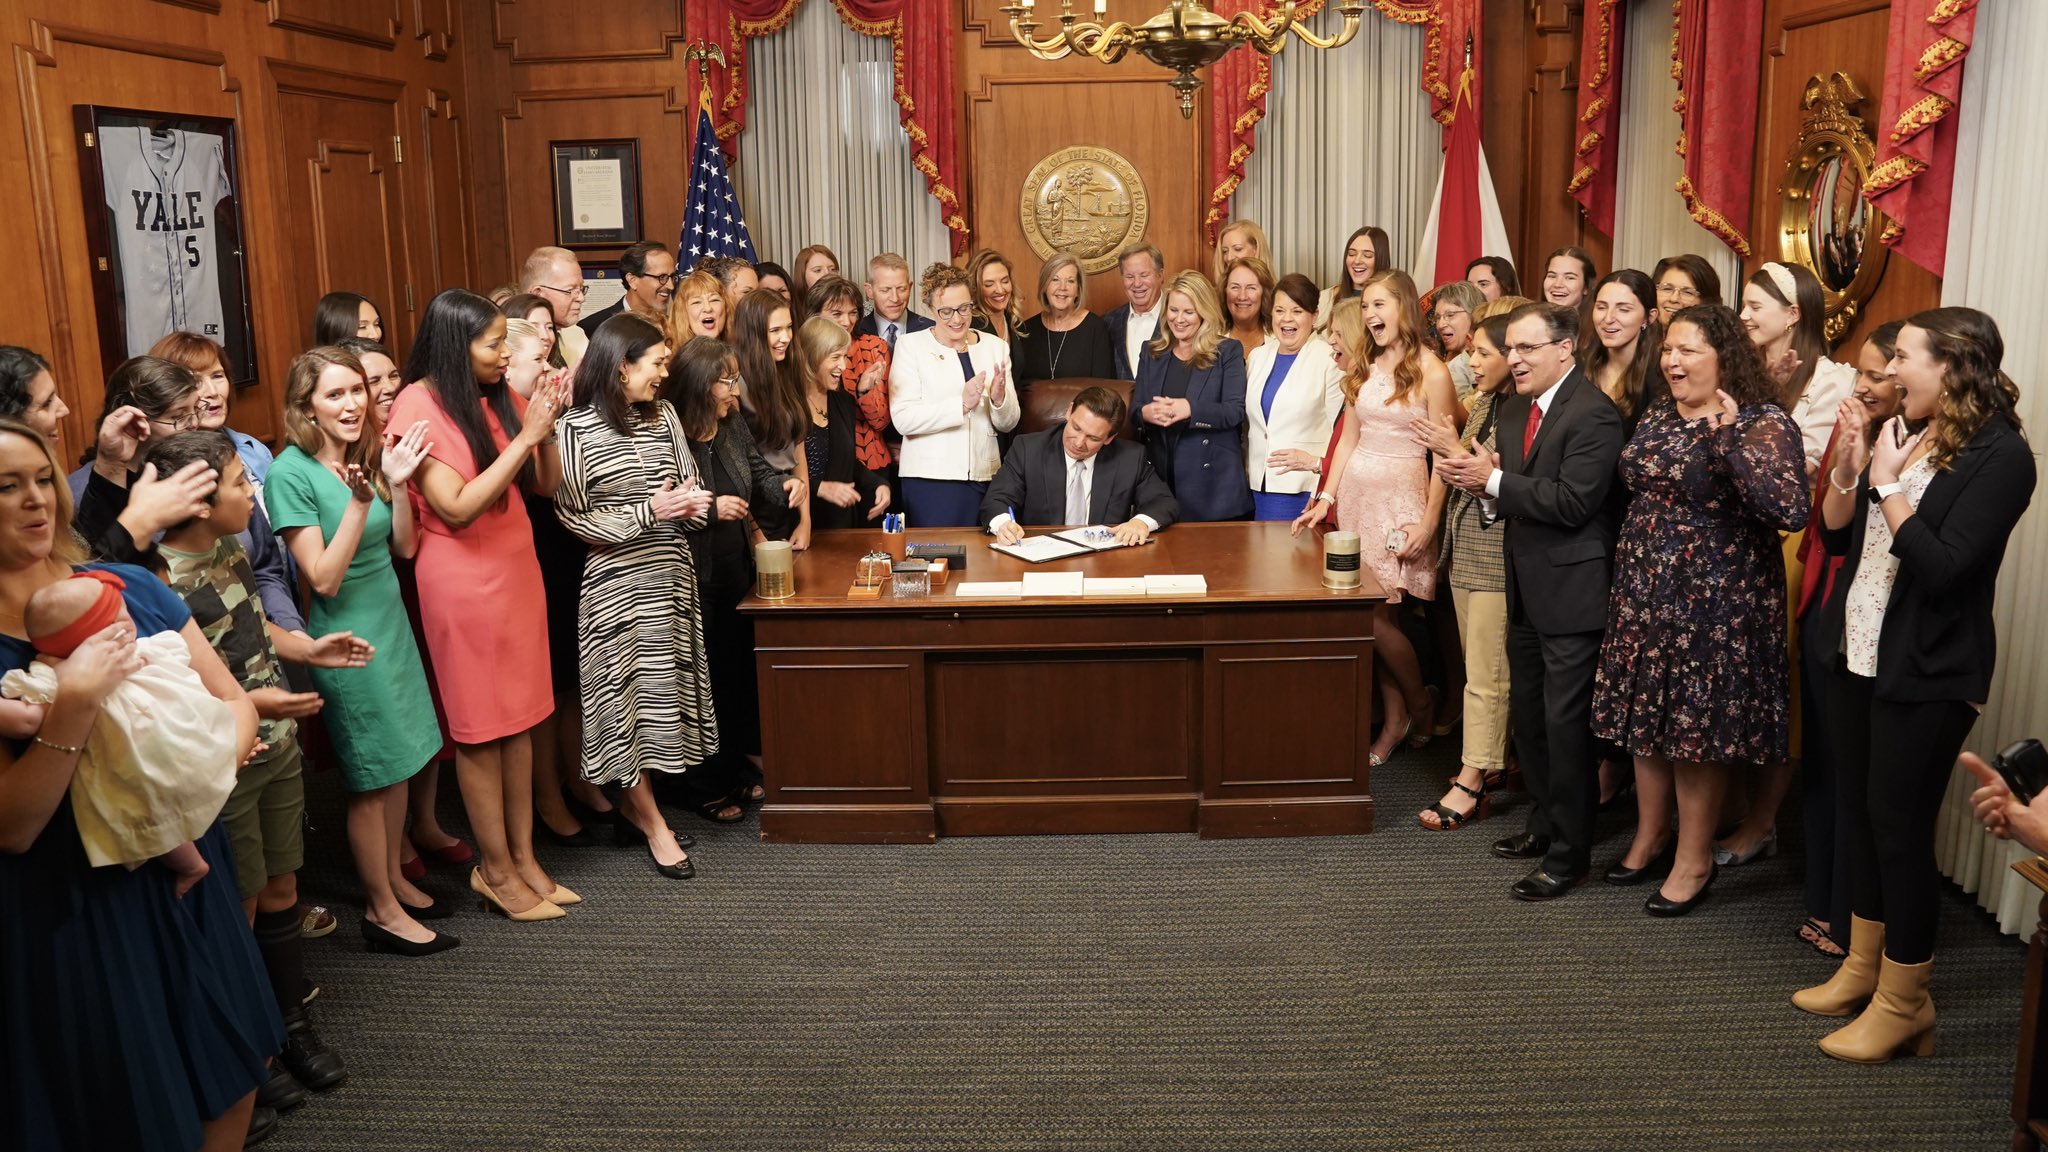 Ron DeSantis Signs Heartbeat Protection Act Into Law Cementing ‘Historic’ Pro-Family Agenda